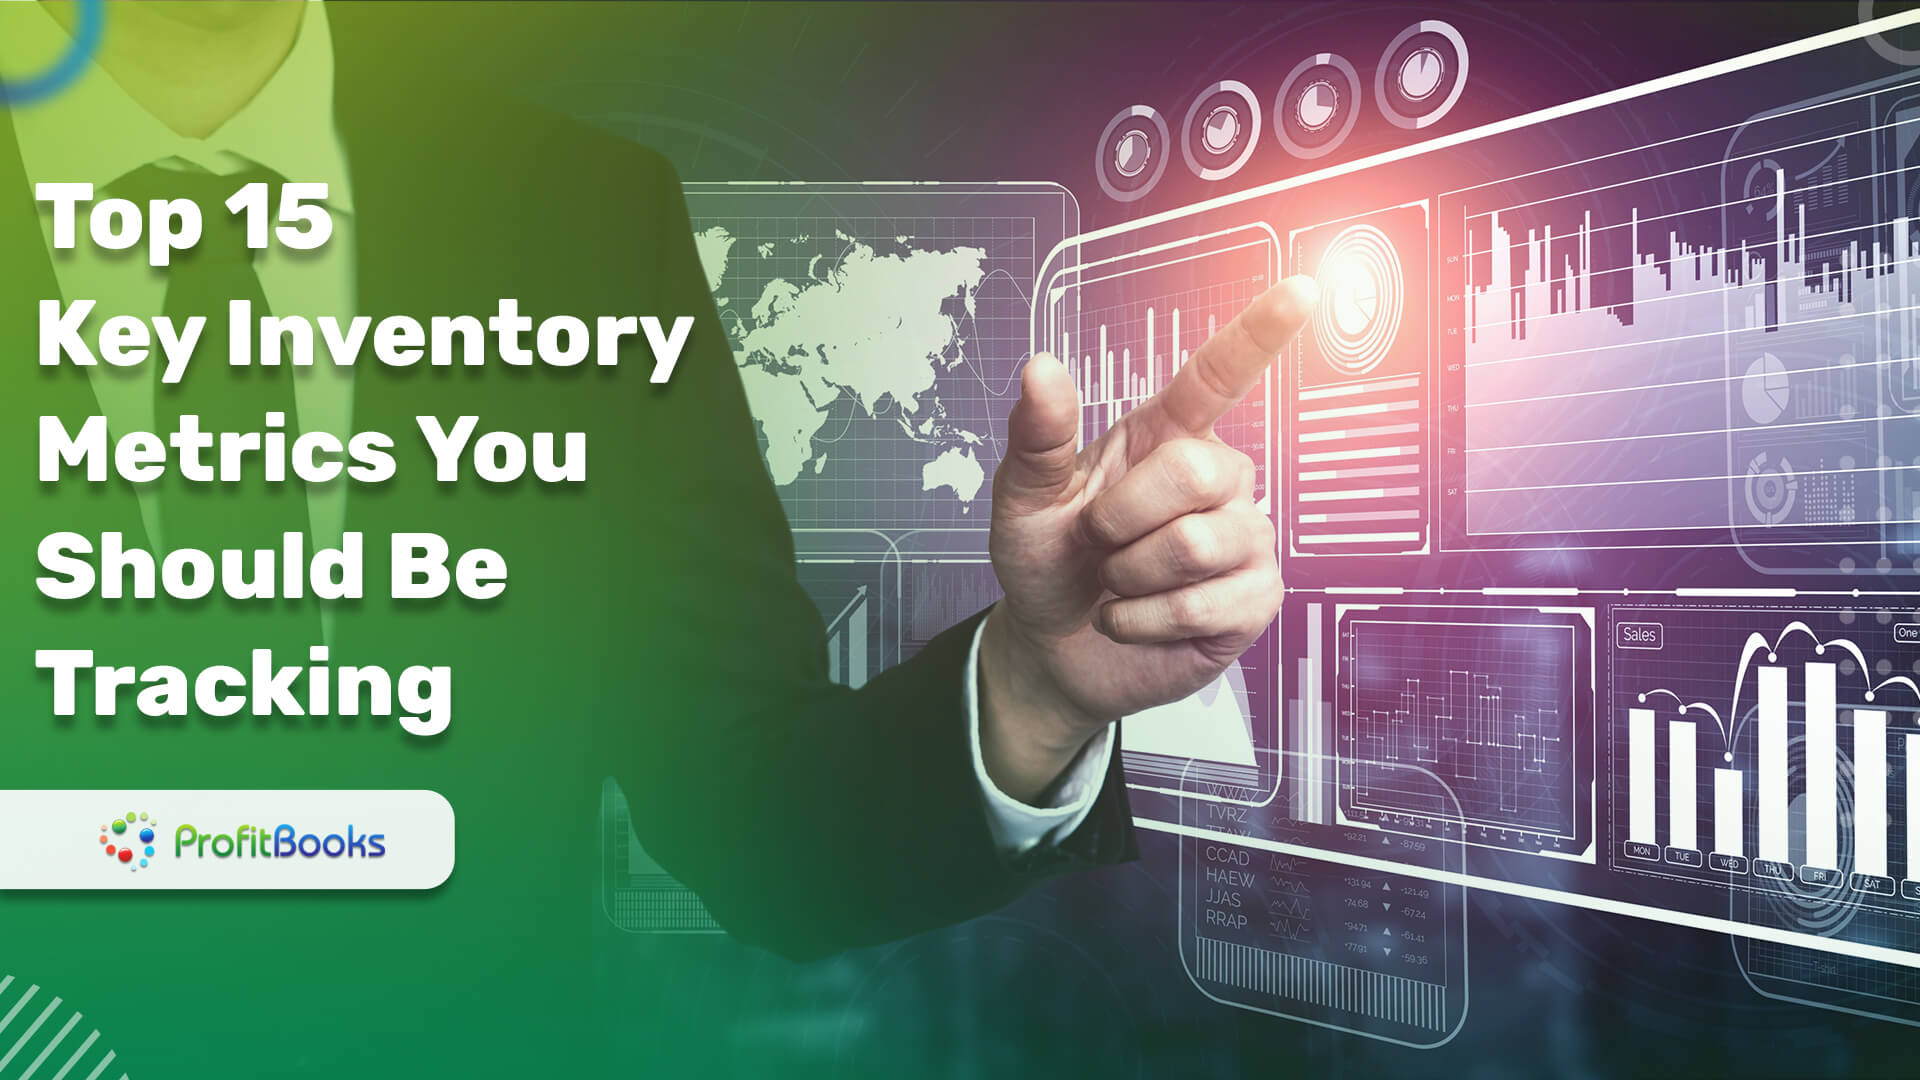 Top 15 Key Inventory Metrics You Should Be Tracking